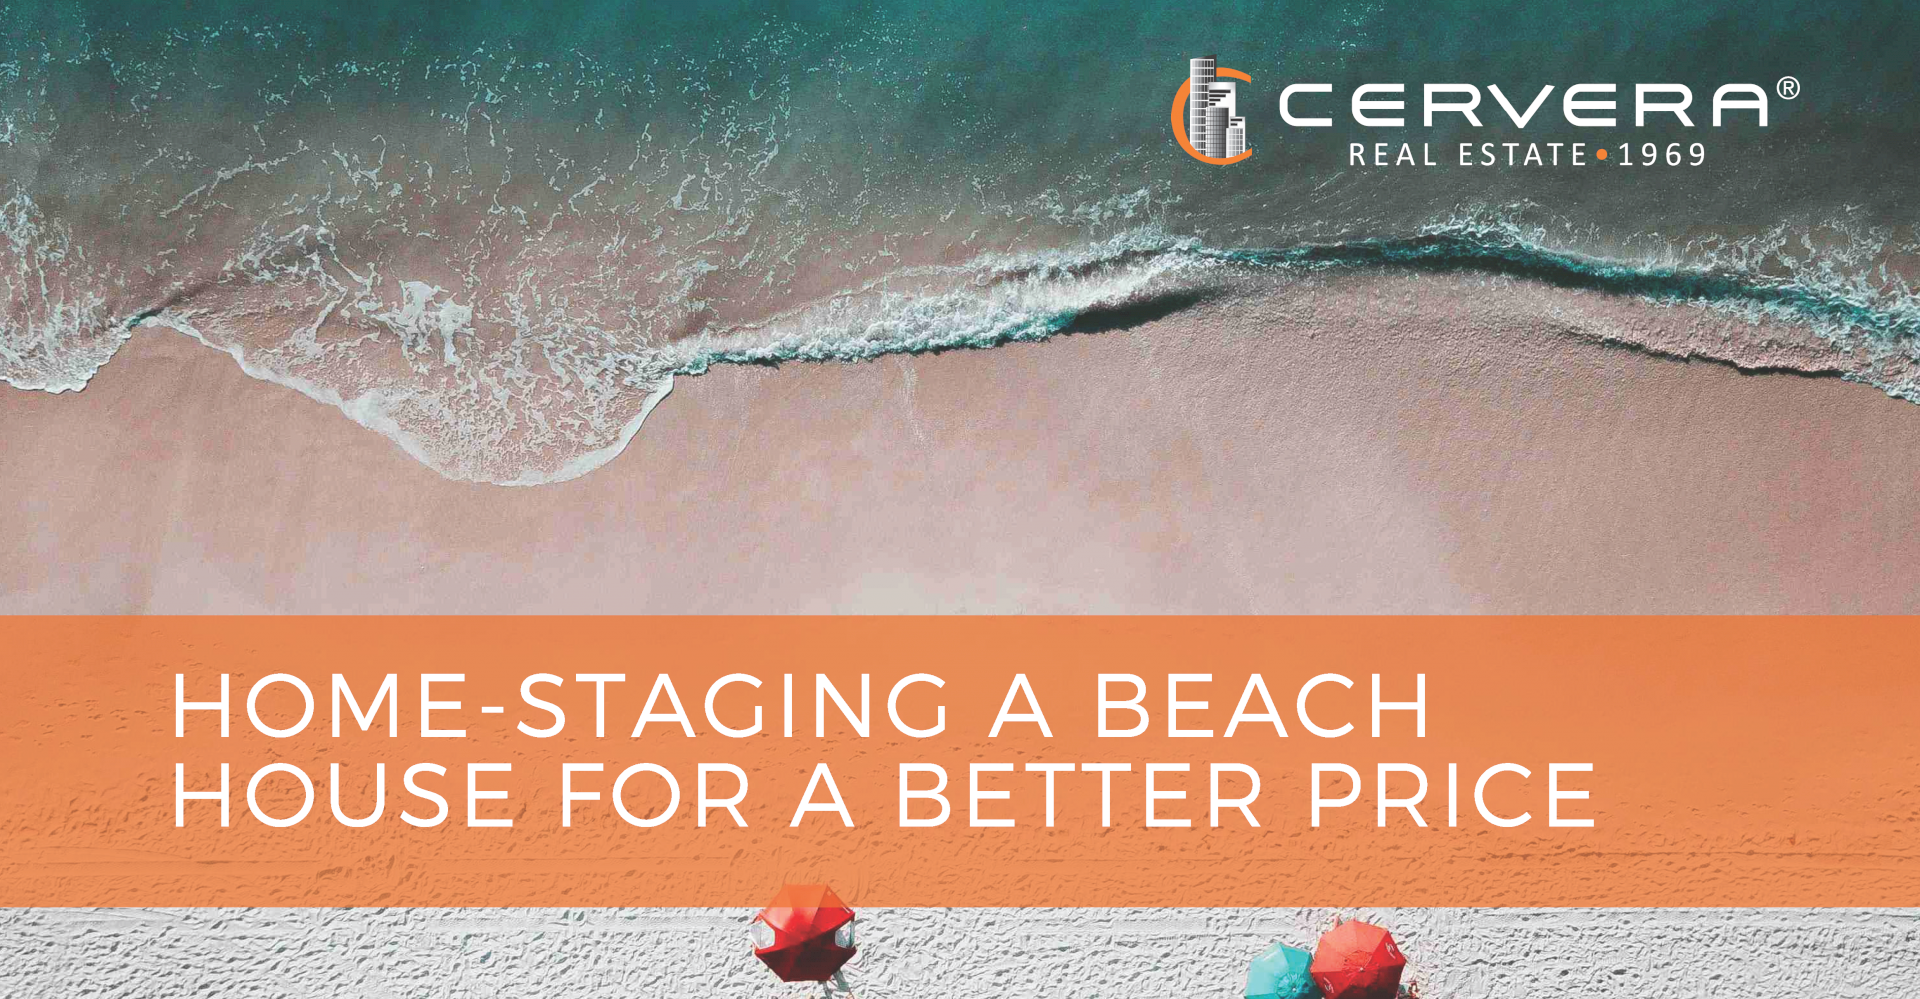 Home-staging a beach house for a better price